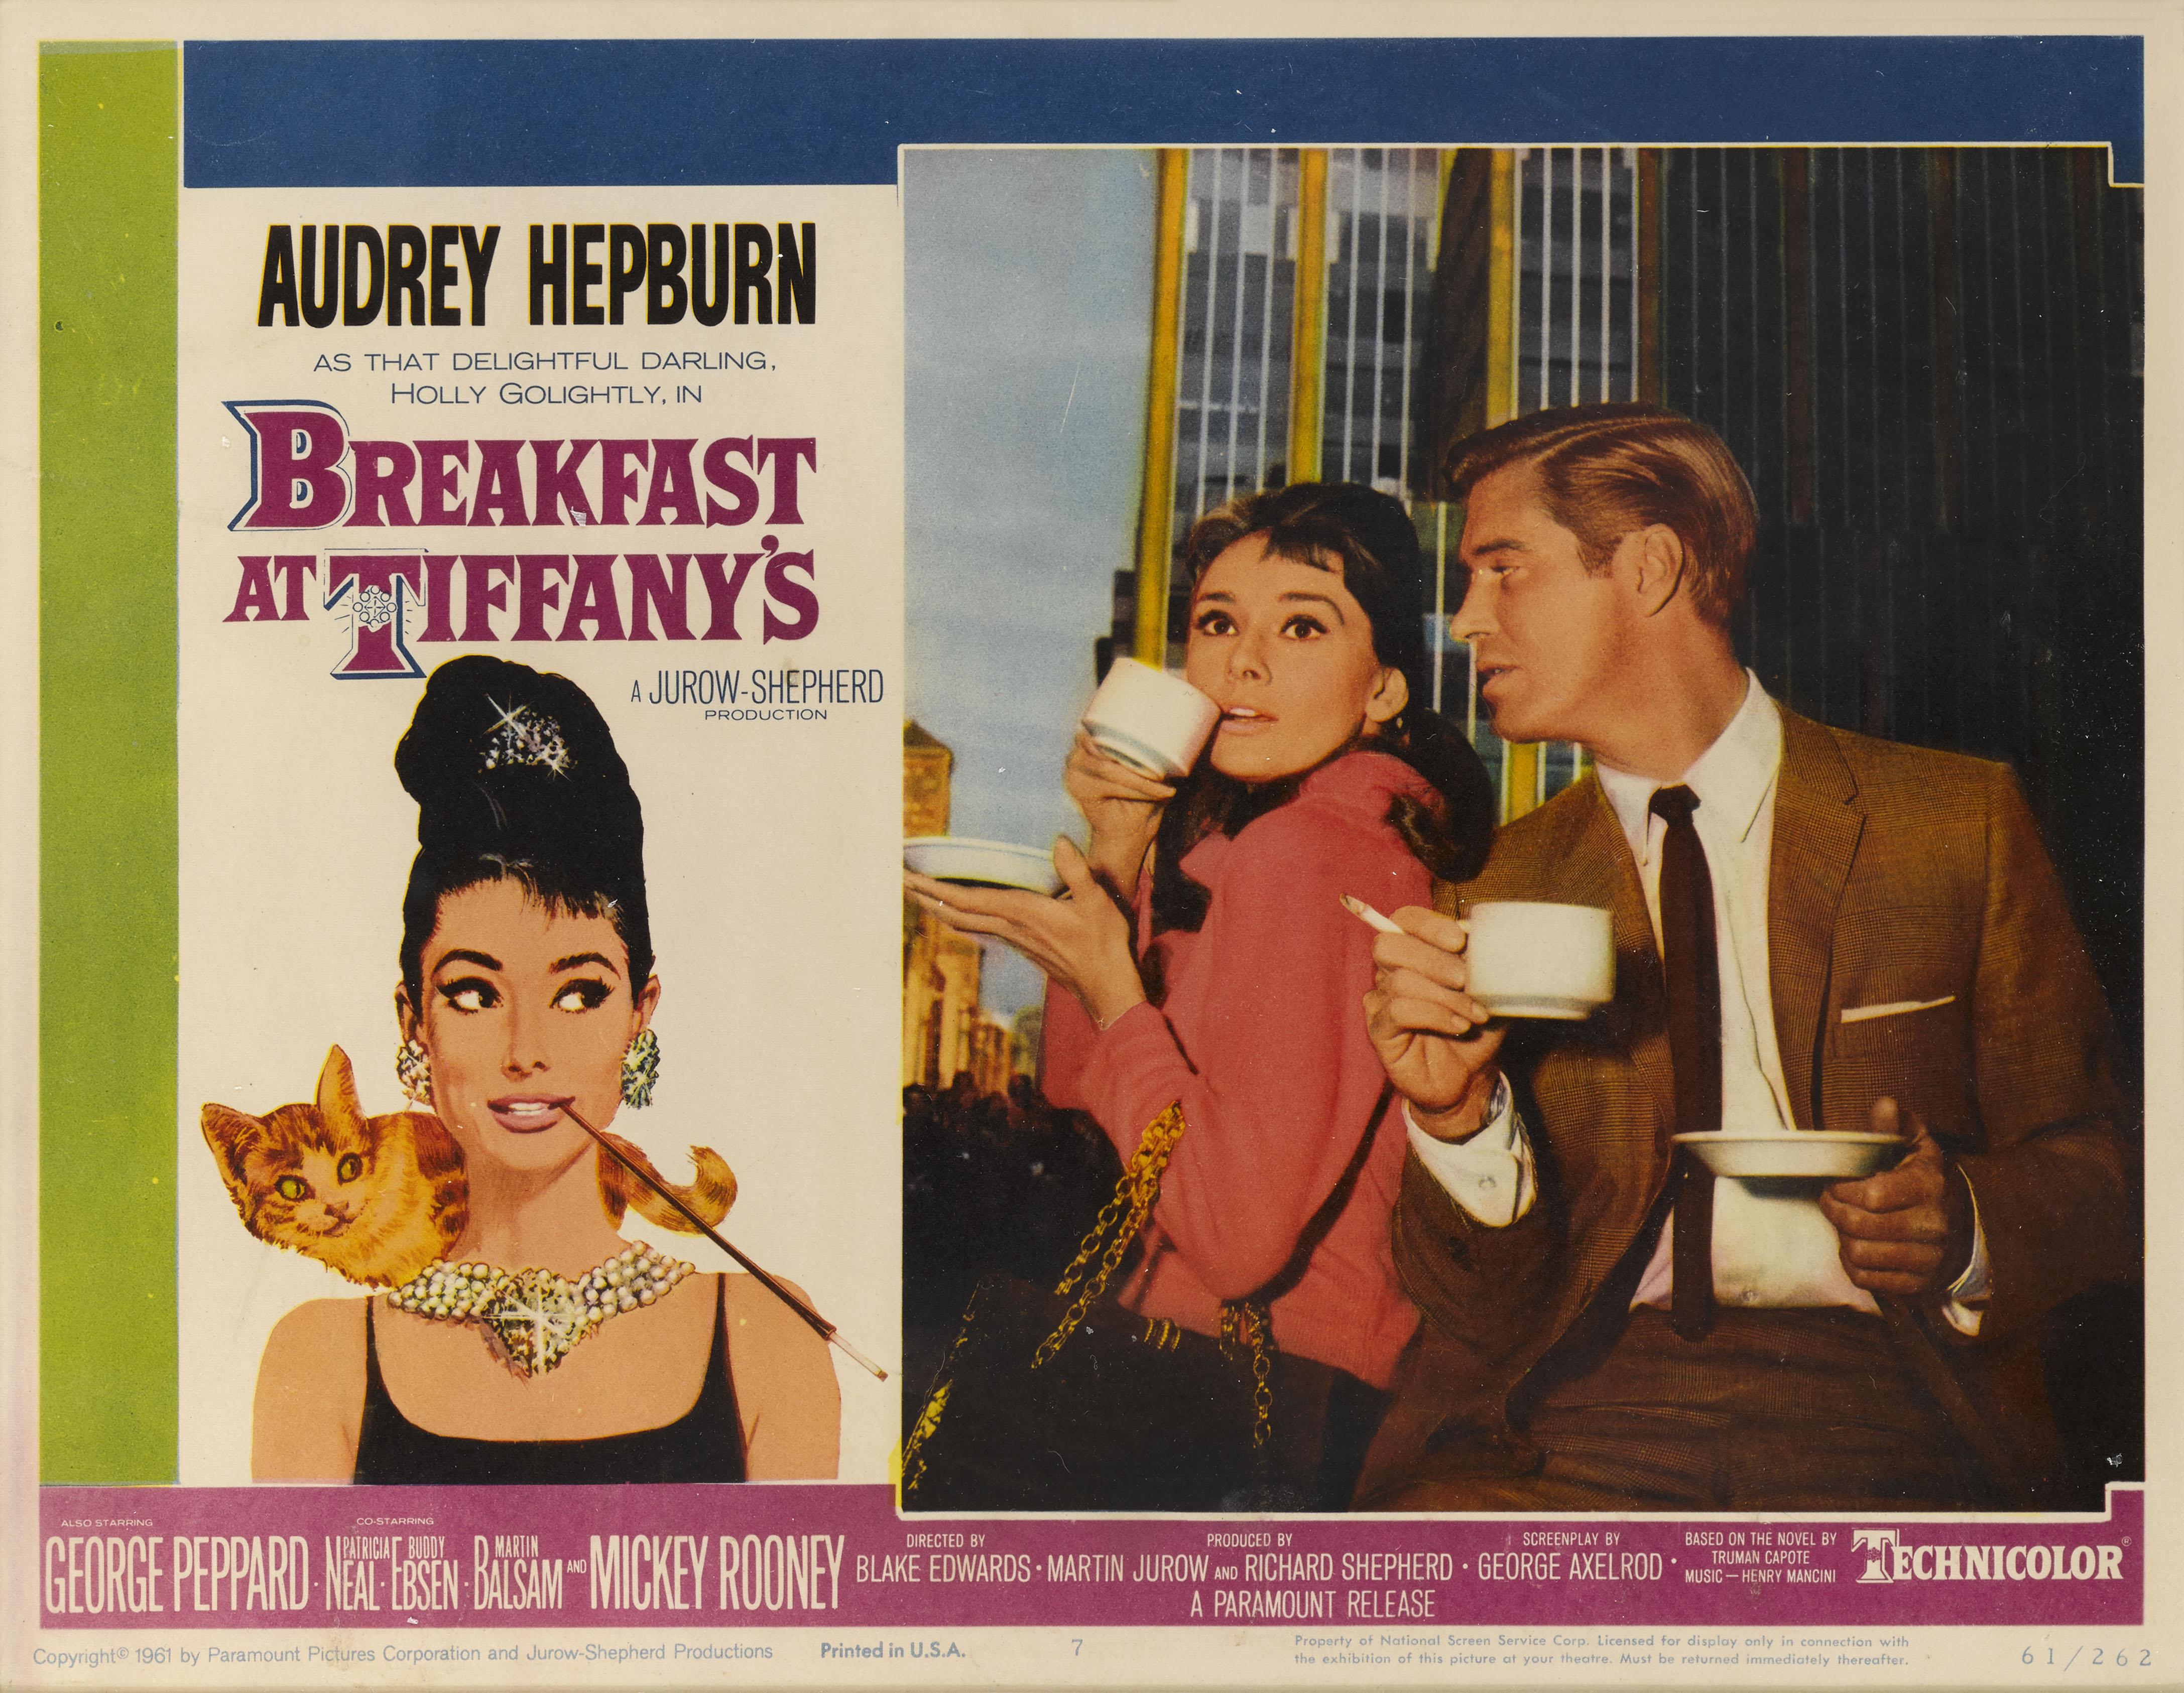 Original US Lobby card number 7 designed for the legendary 1961 Audrey Hepburn Comedy, Romance.
This film was directed by Blake Edwards, and stars Audrey Hepburn and George Peppard. This is undoubtedly Hepburn's most famous and iconic role.
This